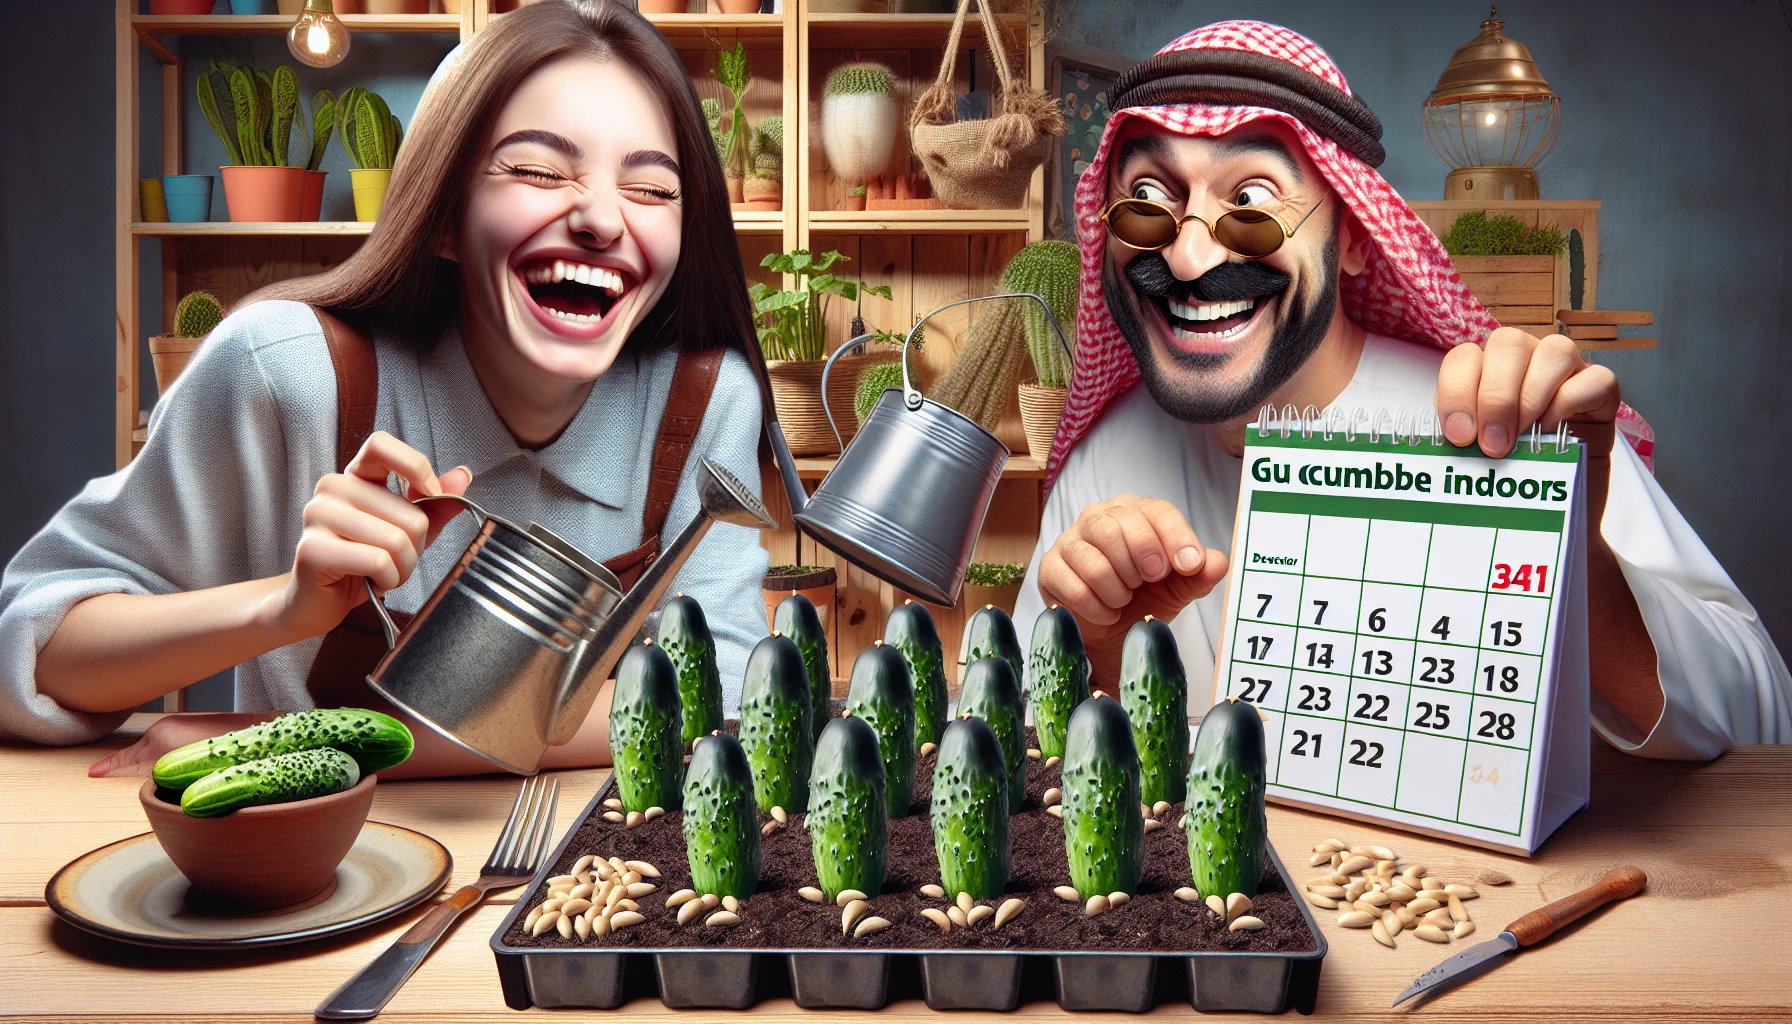 Create a humorous and realistic image that presents the concept of starting cucumber seeds indoors as an enjoyable gardening activity. The image depicts a set of cucumber seeds arranged on a tabletop next to a calendar marked with a date signifying the ideal time to start the activity. A young Caucasian woman laughing cheerfully as she plants the seeds, and a Middle Eastern man with a quirky smile holding a watering can, ready to nourish the newly planted seeds. The background shows various indoor plants and gardening tools, accentuating the vibe of indoor gardening.